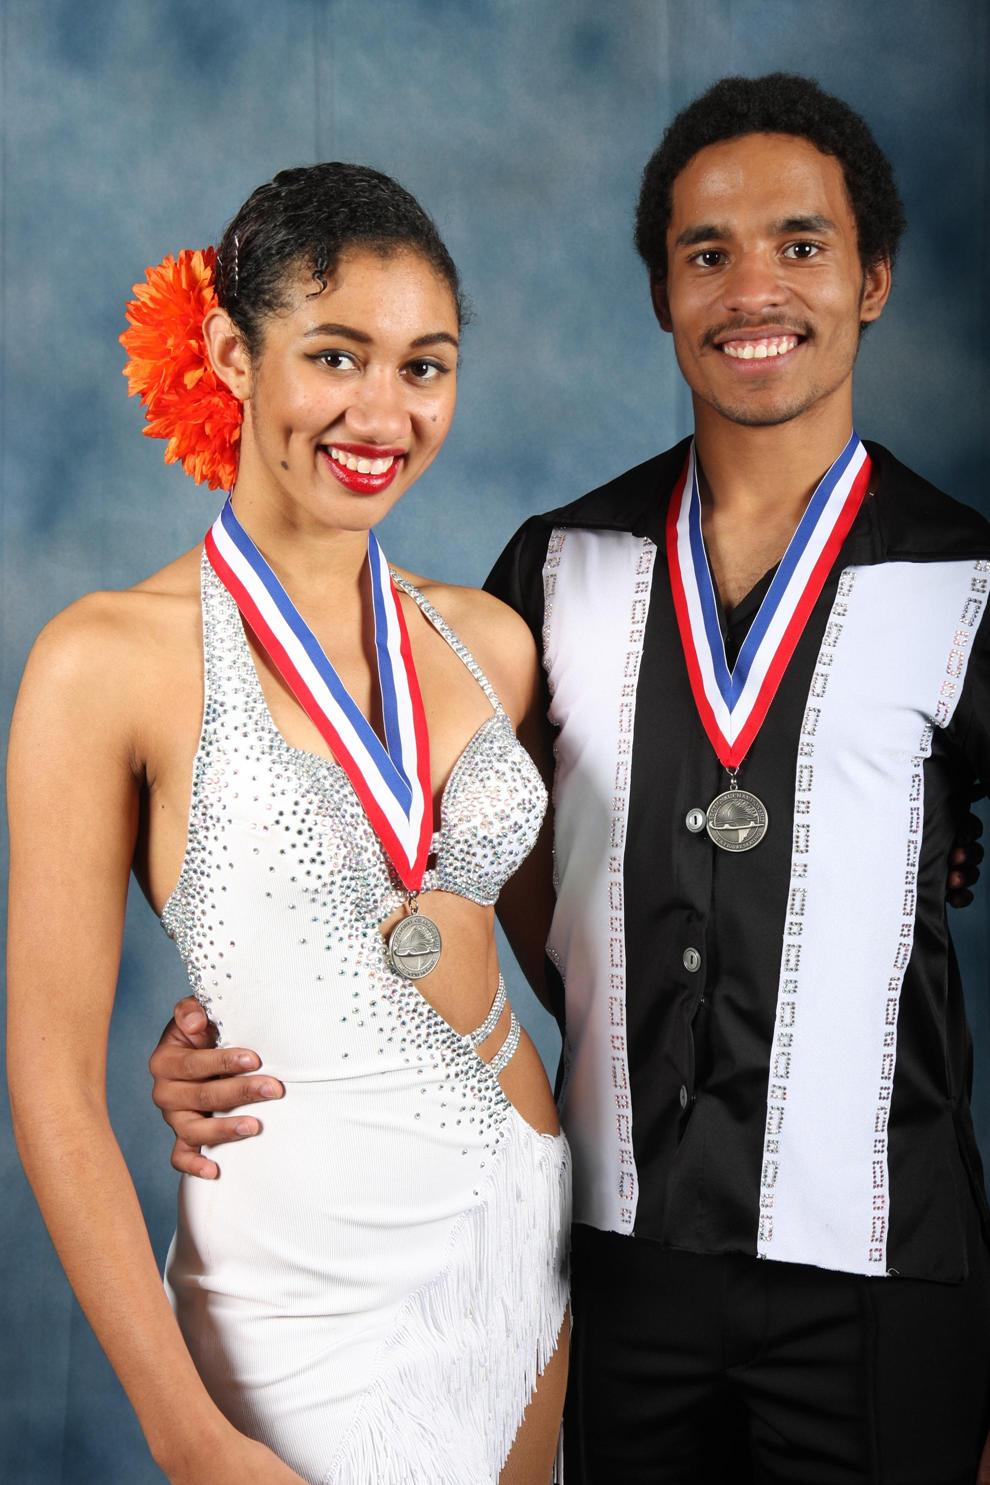 Kova and Ross, Sectional Medalists 2010